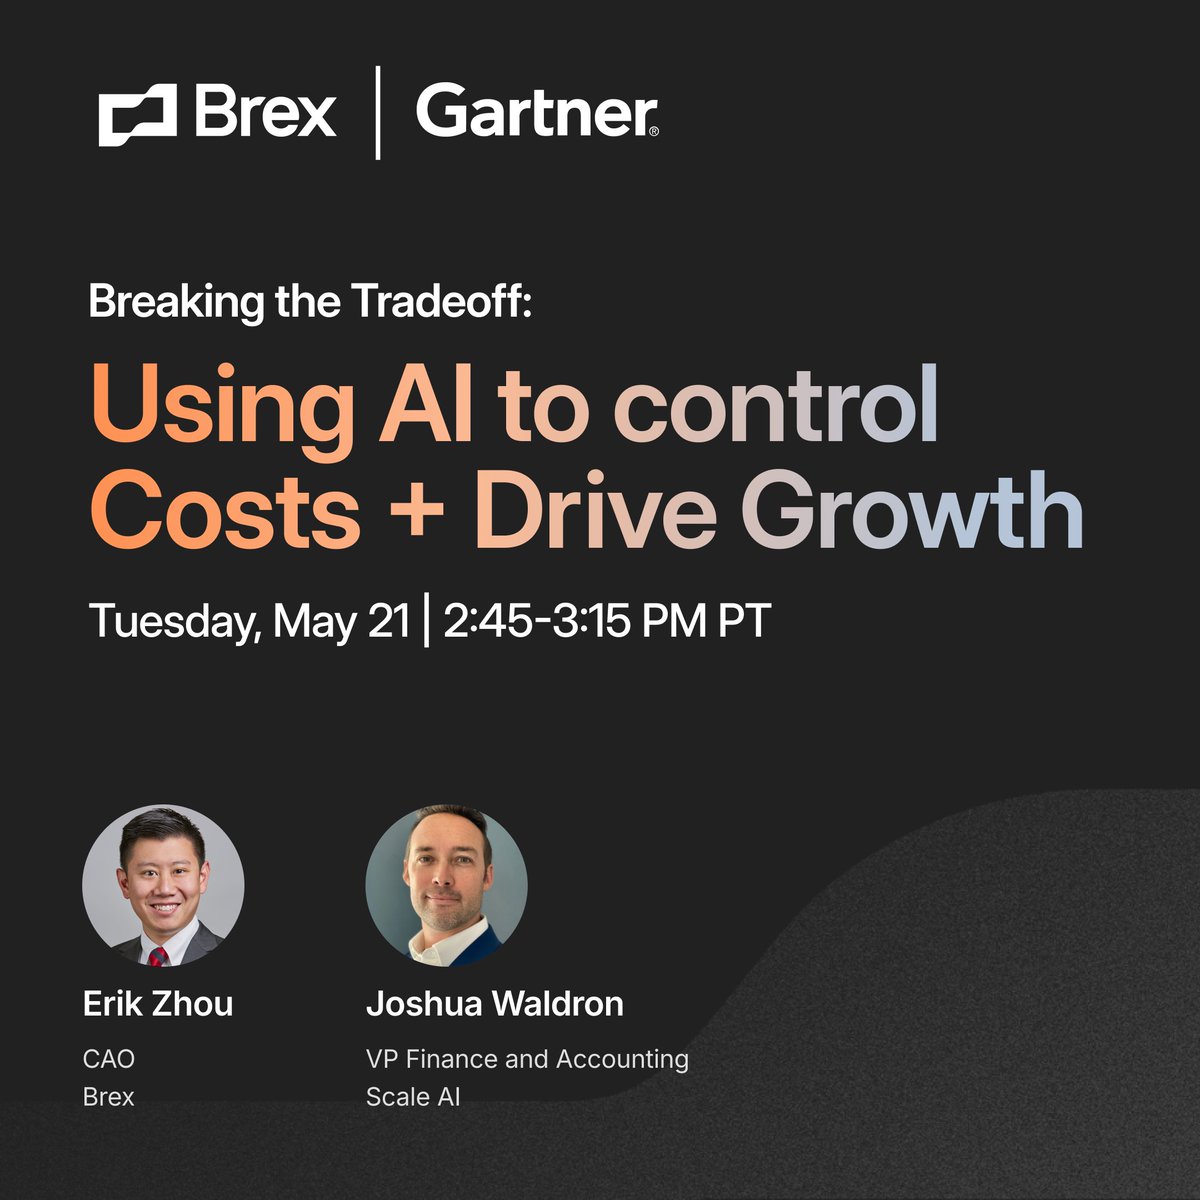 This year's @Gartner_inc CFO Conference is right around the corner, and our CAO, Erik Zhou, will be there to discuss the ways #GenerativeAI is an invaluable ally to today's finance teams. Join his session on May 21st with @scale_AI's VP of Finance & Accounting, Joshua Waldron,